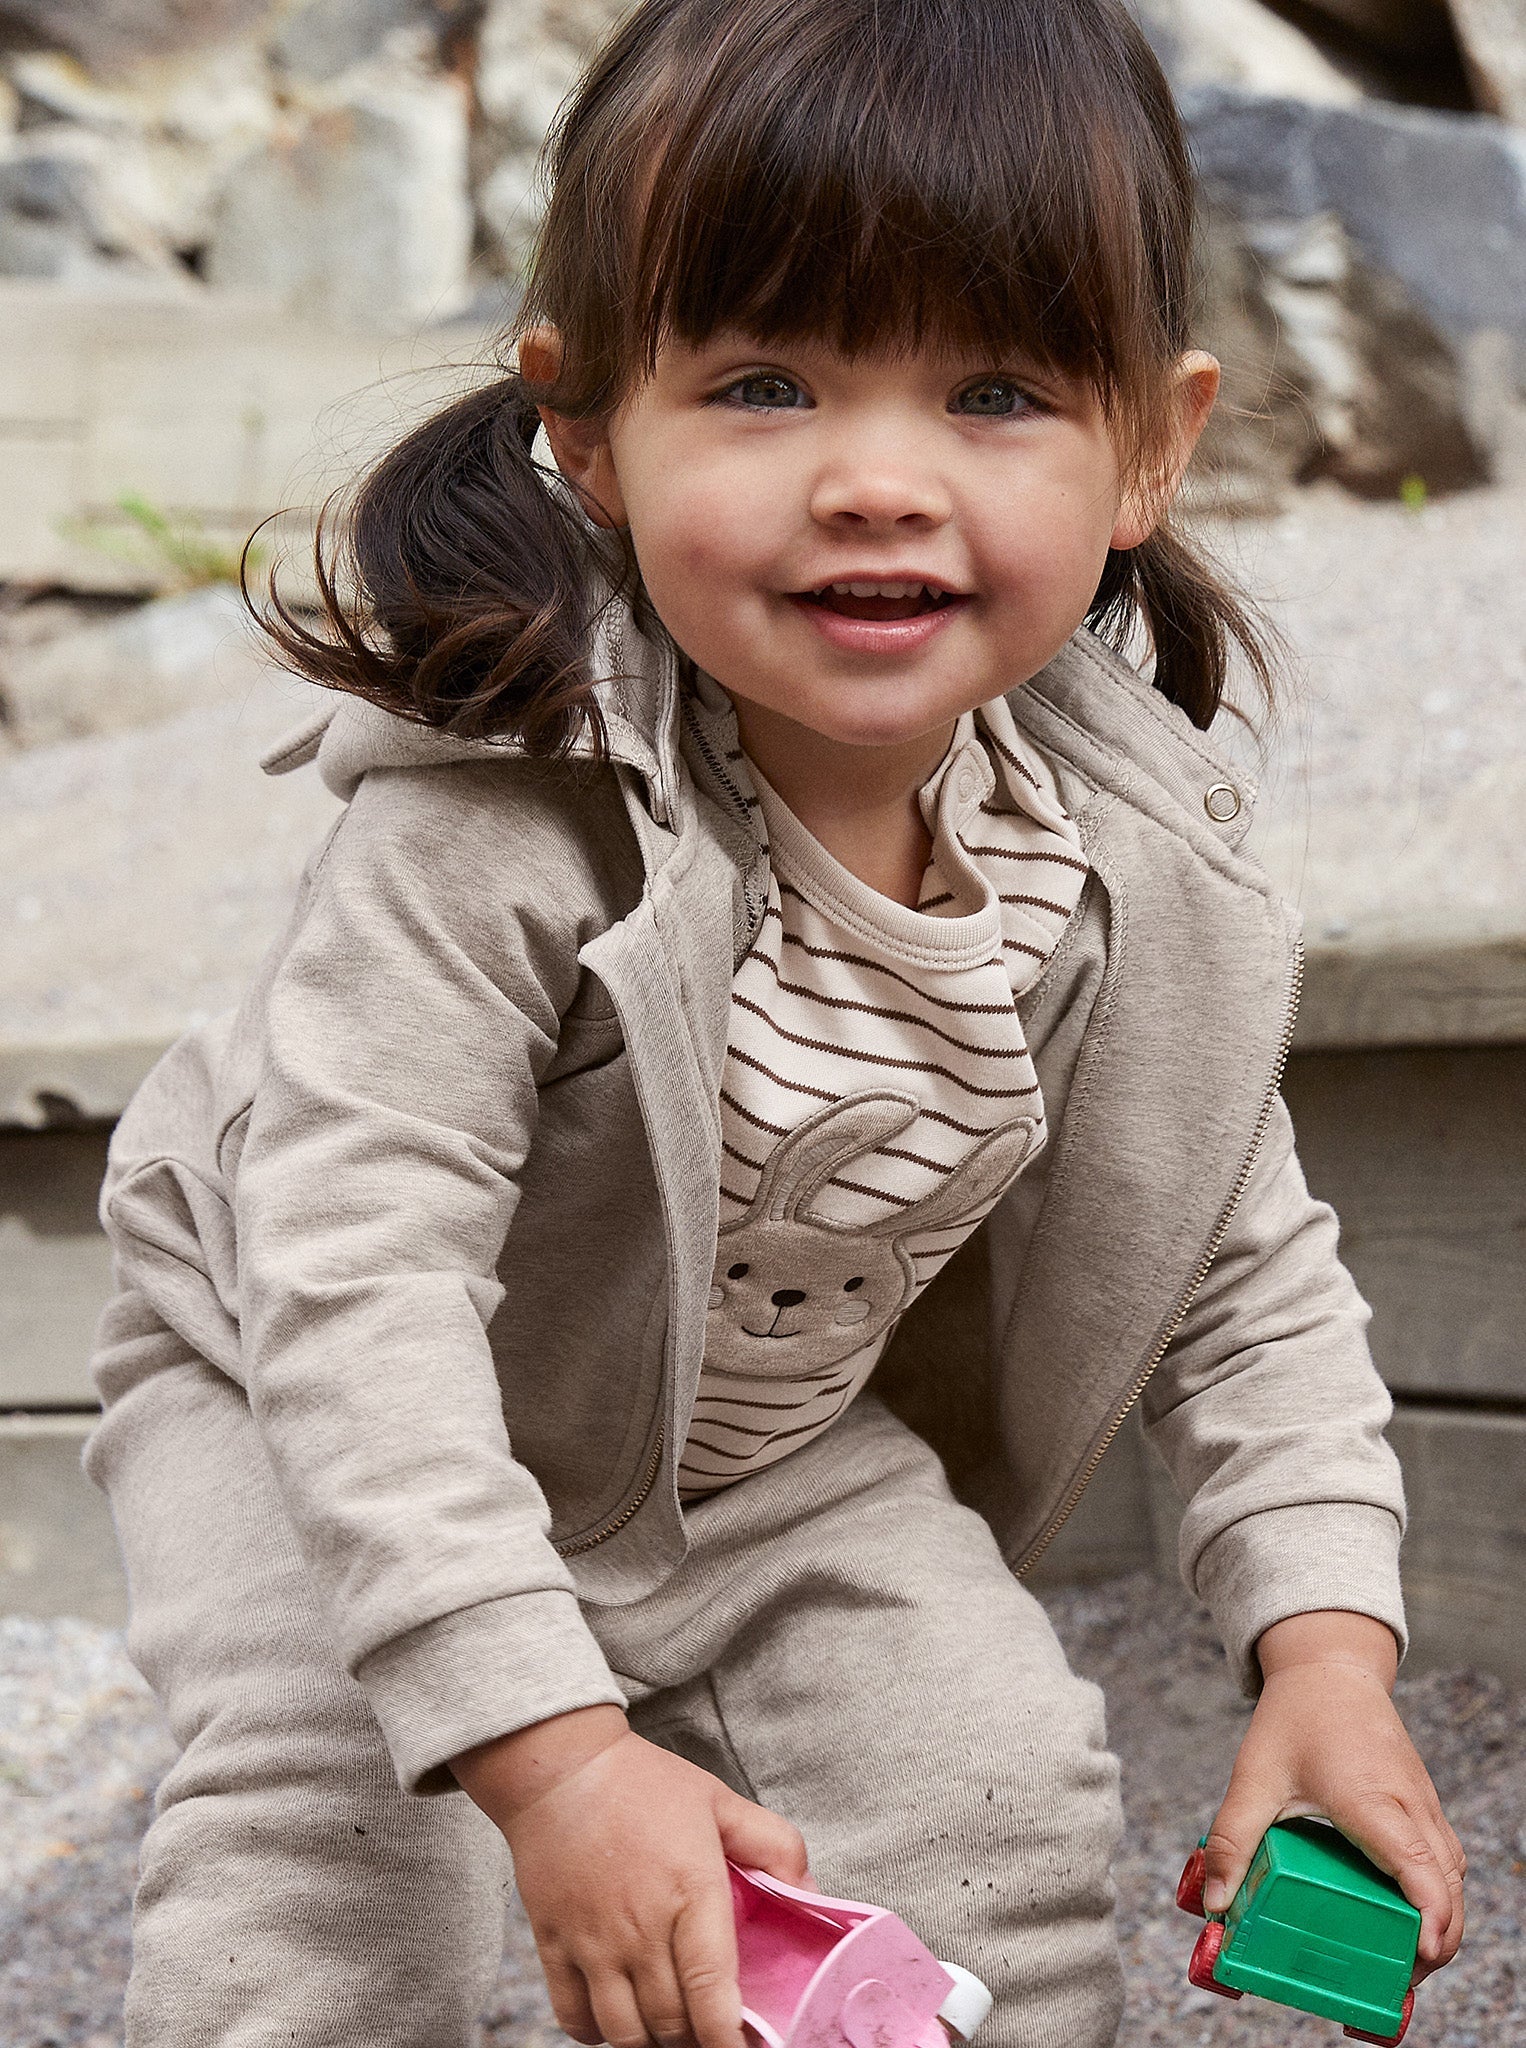 Organic Cotton Beige Baby Leggings from the Polarn O. Pyret Kidswear collection. Clothes made using sustainably sourced materials.